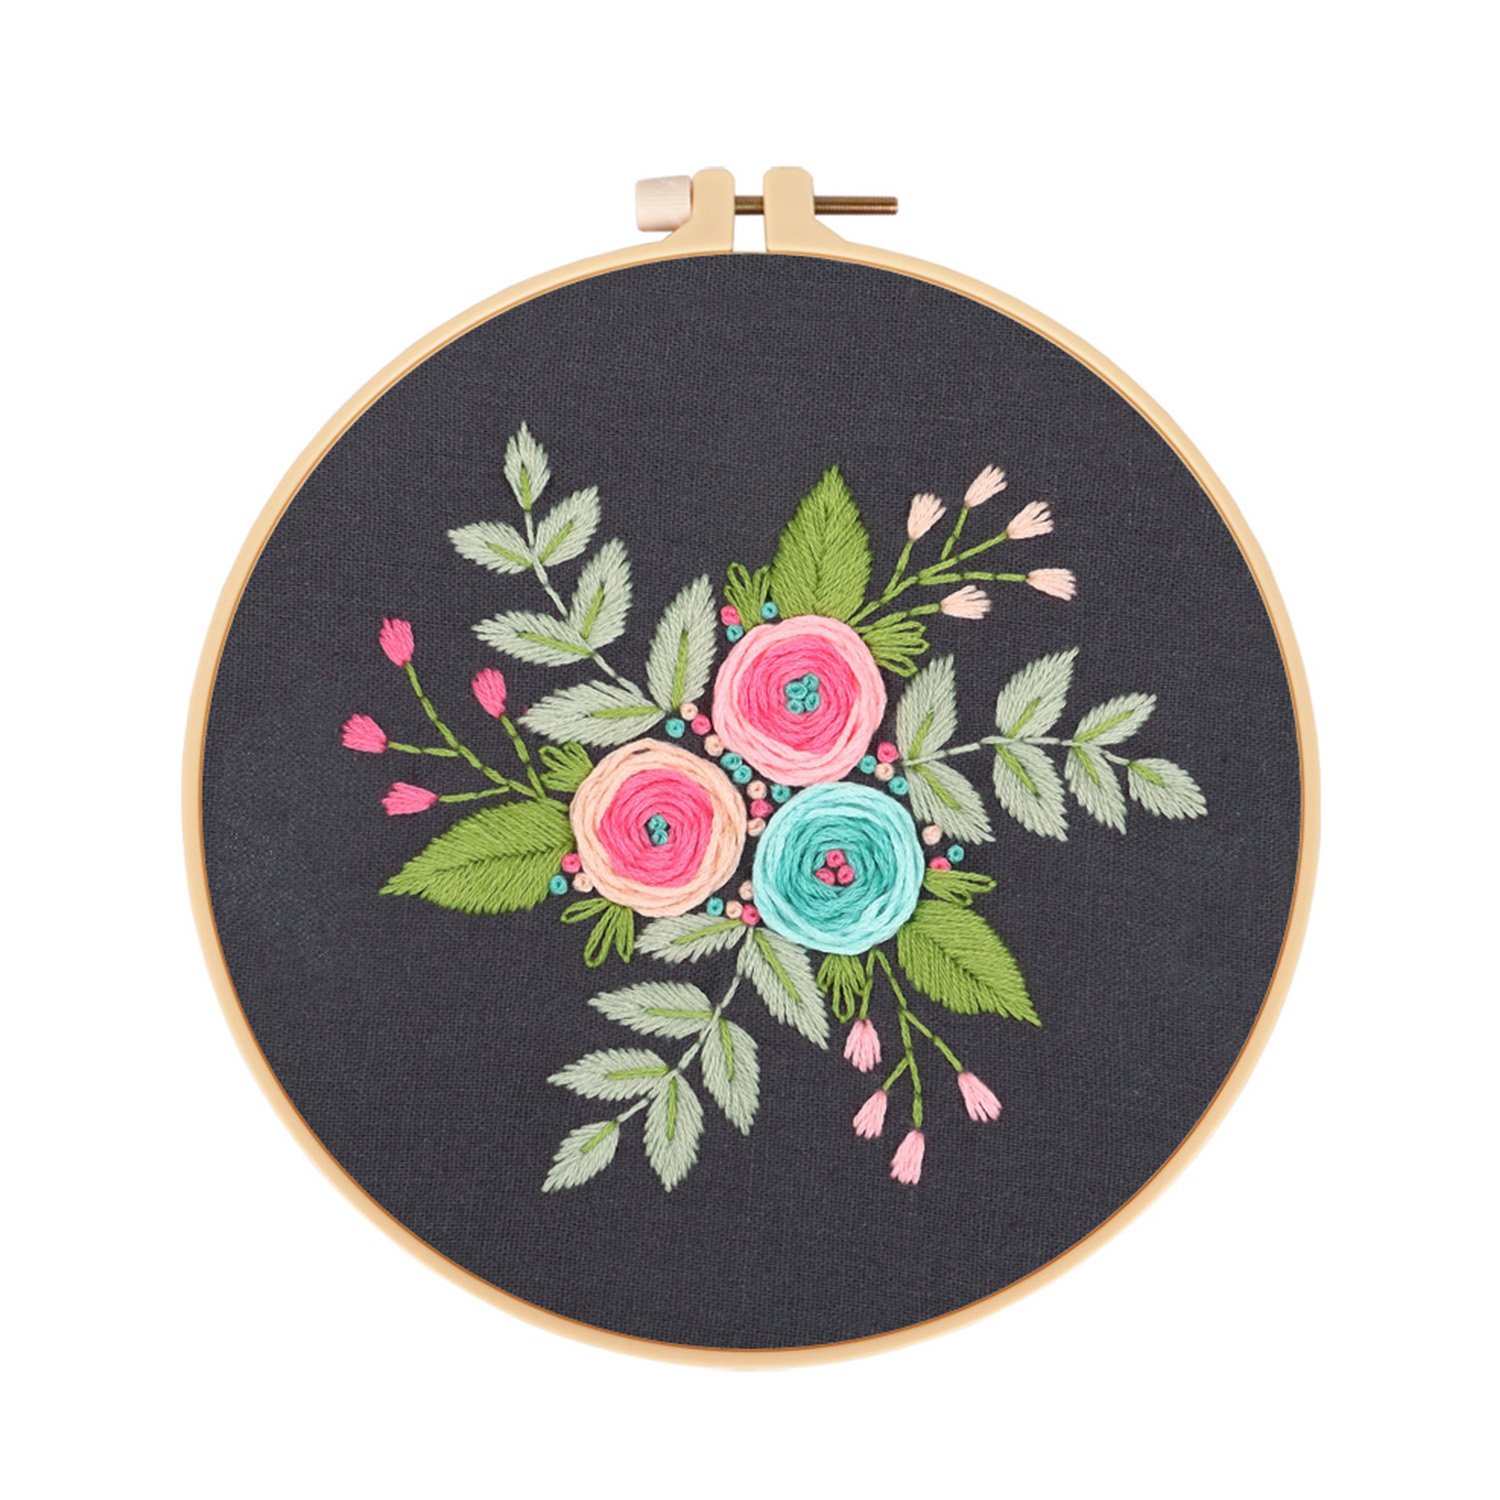 DIY Handmade Embroidery Cross stitch kit for Adult Beginner - Exquisite Bouquet Pattern